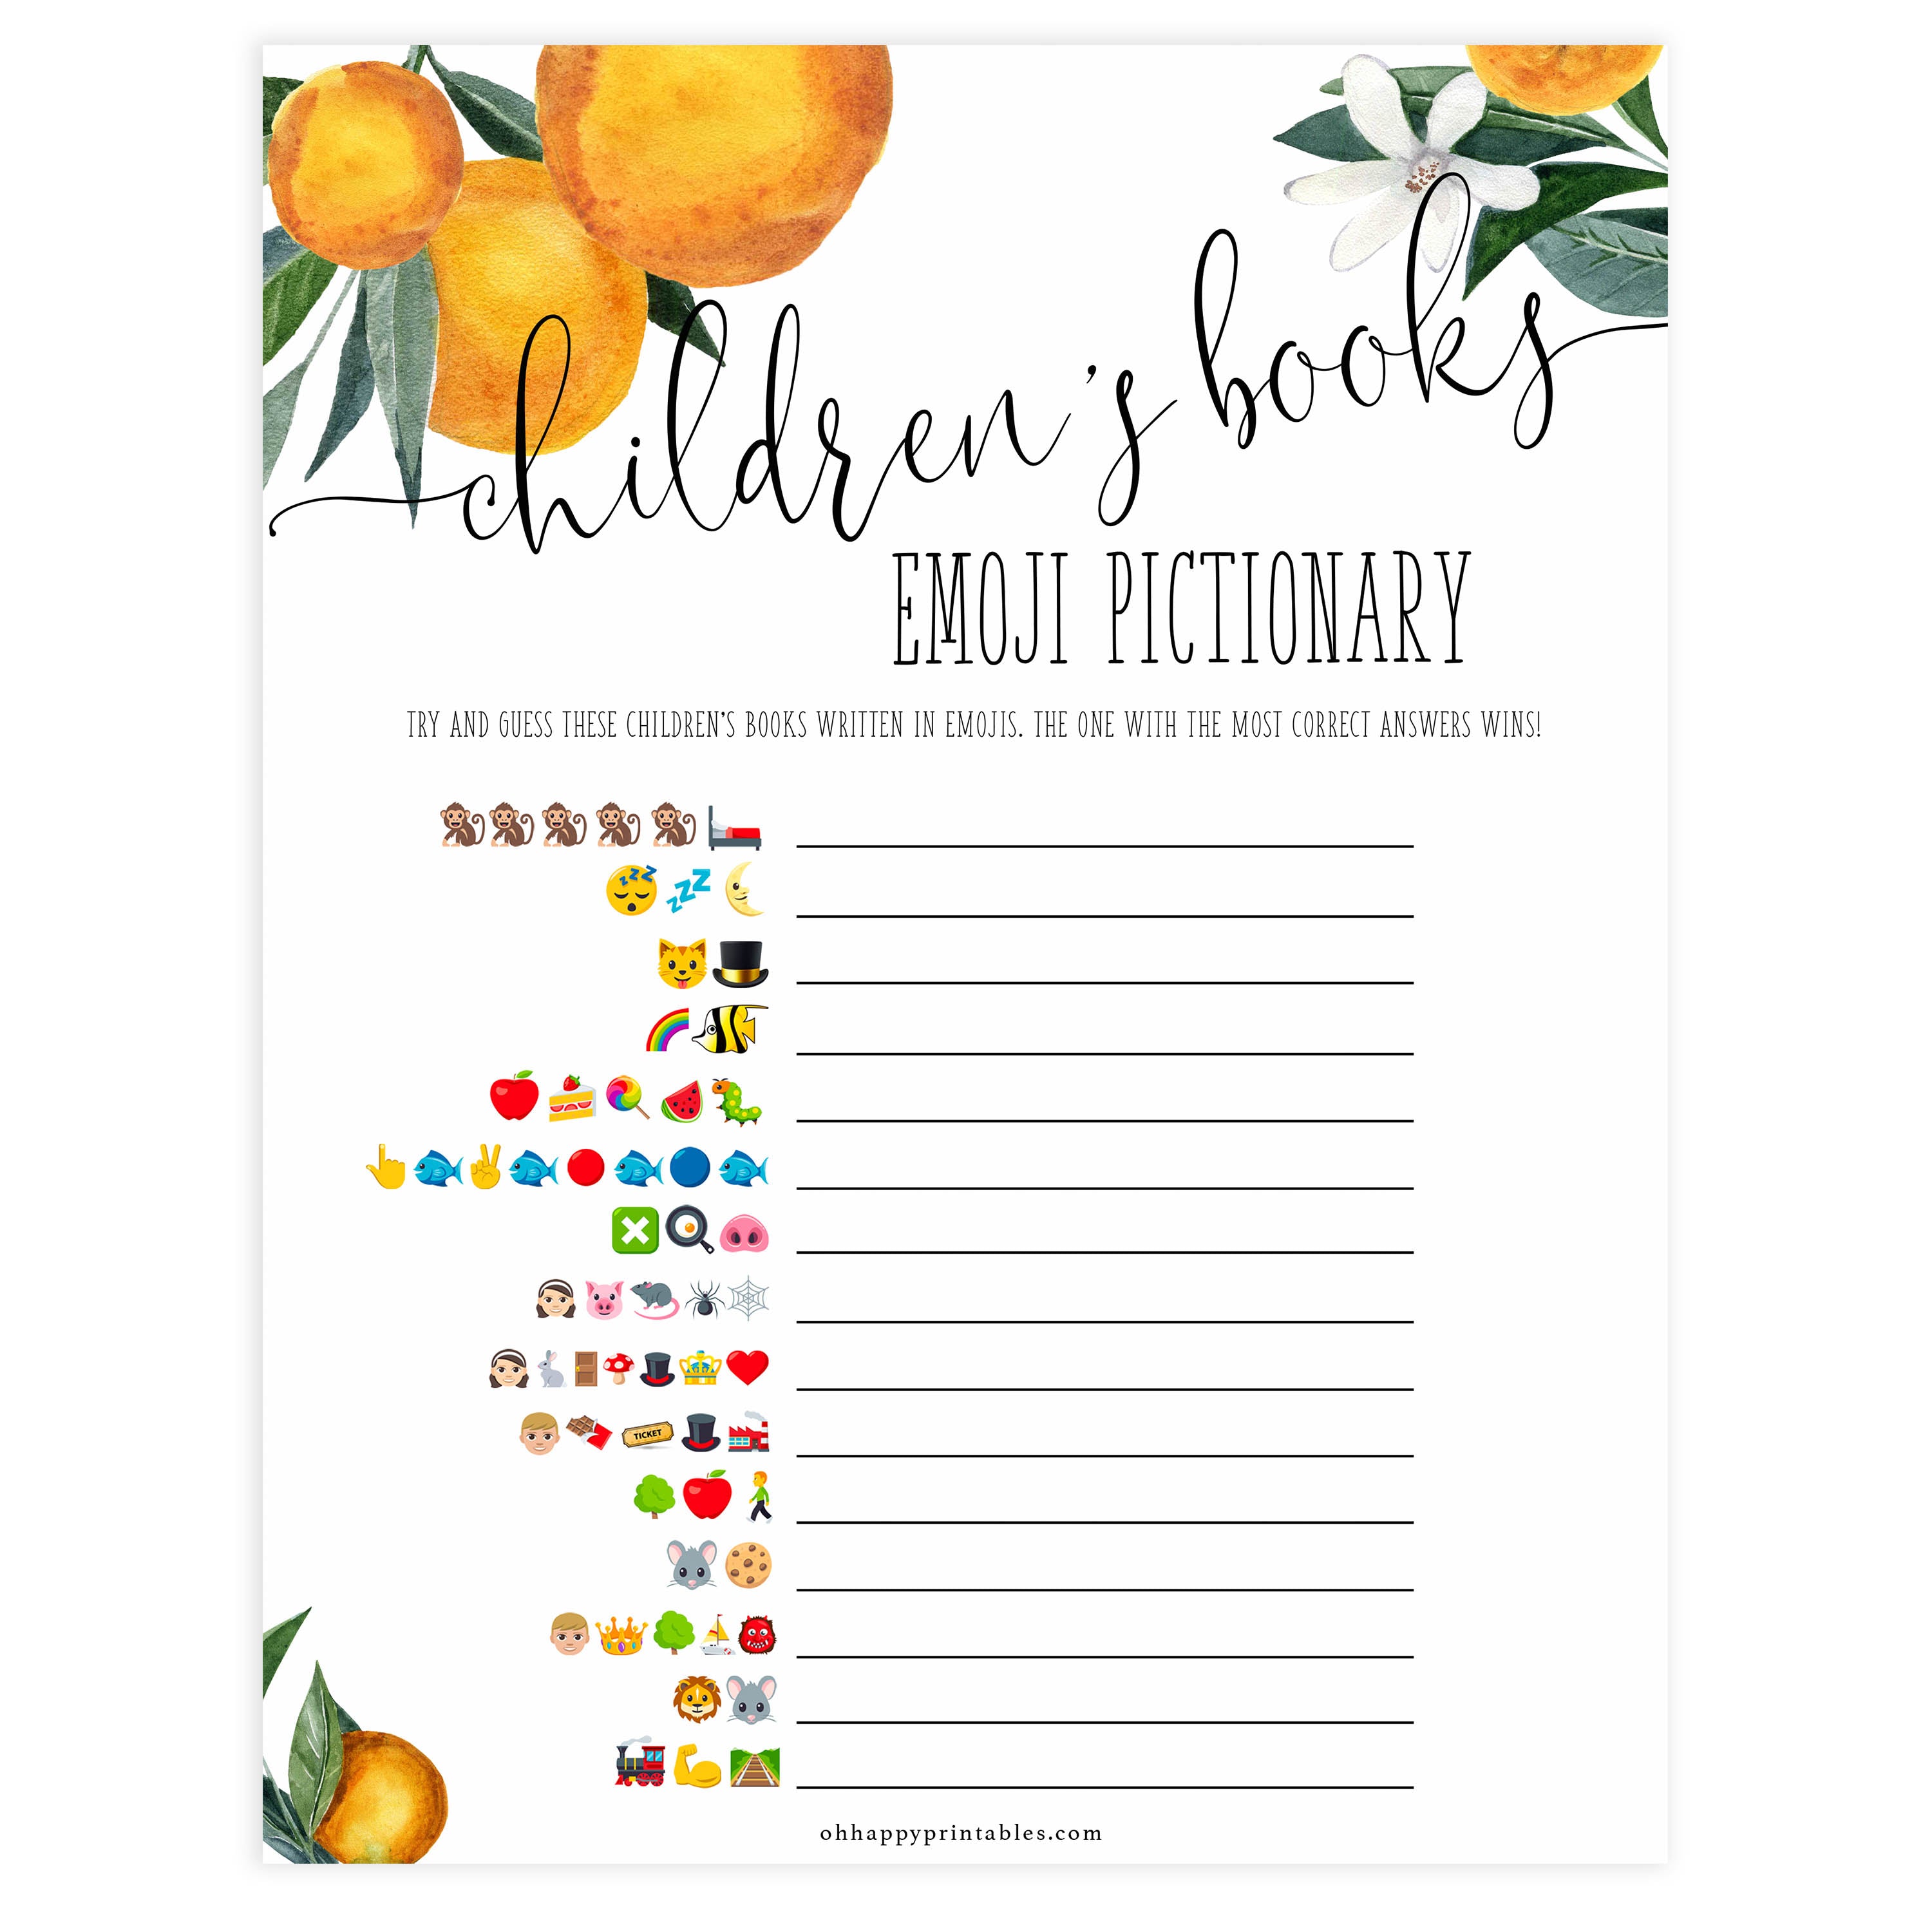 childrens books emoji pictionary game, Printable baby shower games, little cutie baby games, baby shower games, fun baby shower ideas, top baby shower ideas, little cutie baby shower, baby shower games, fun little cutie baby shower ideas, citrus baby shower games, citrus baby shower, orange baby shower